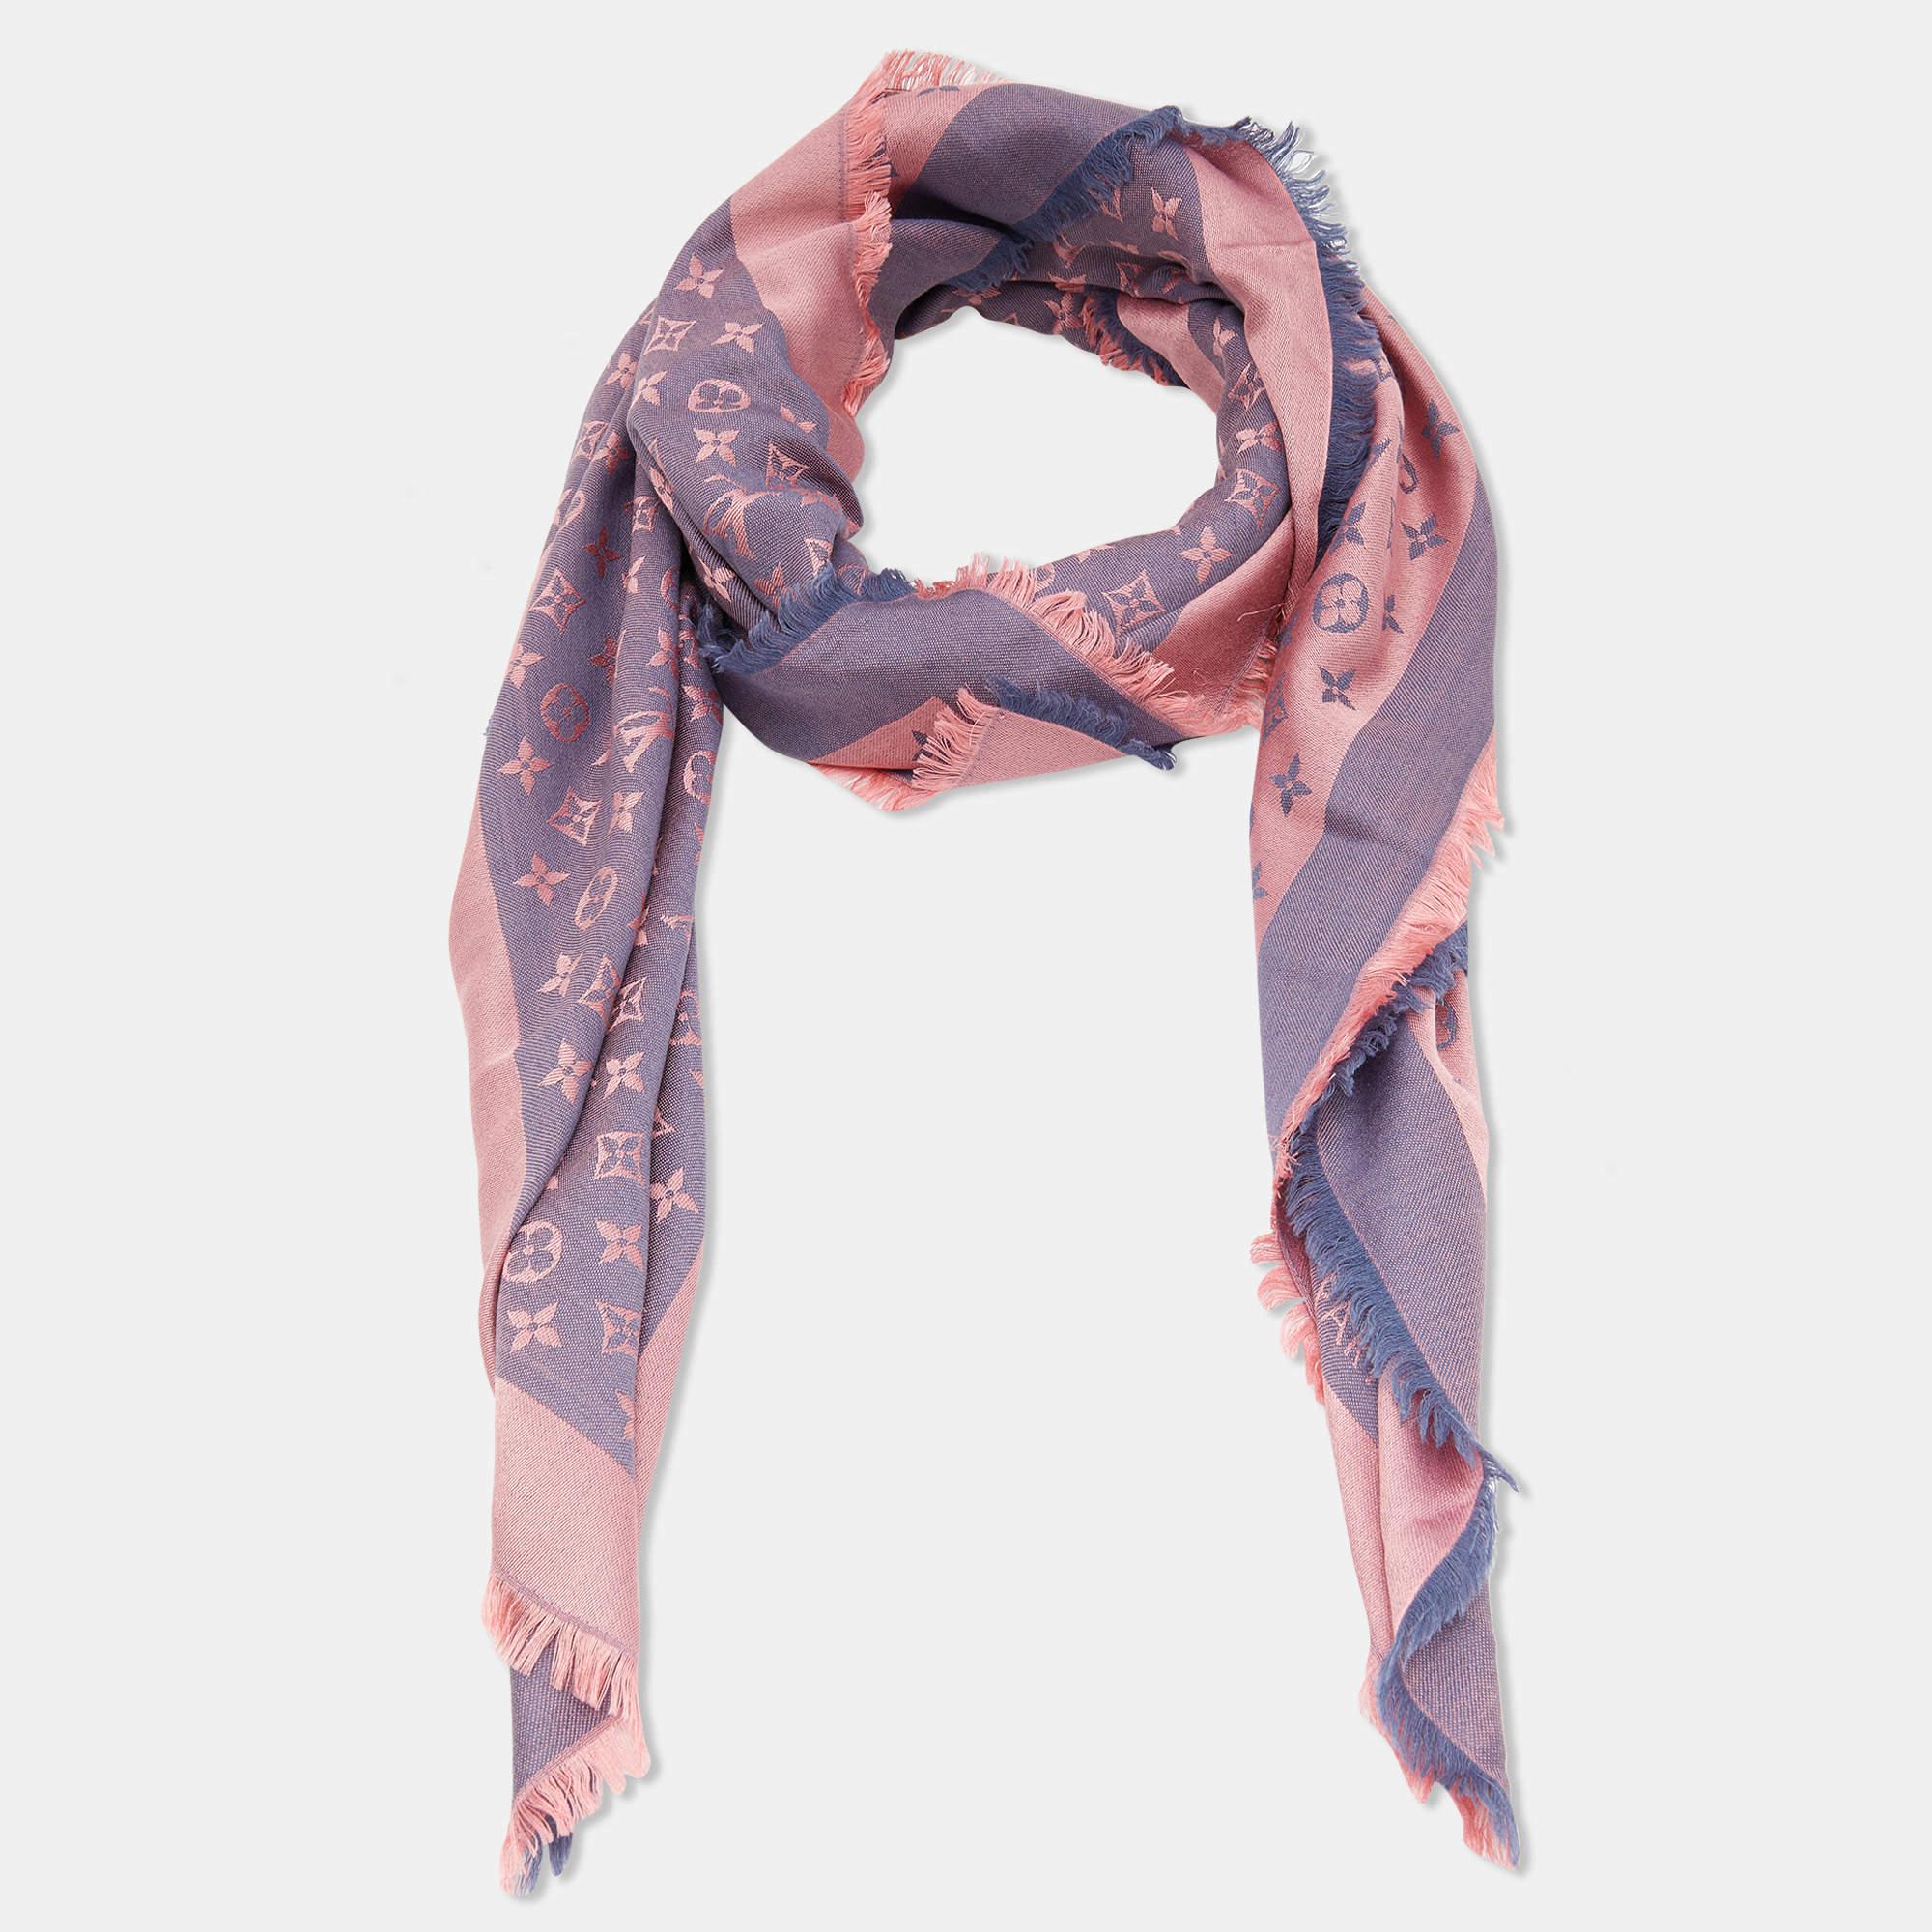 For days when you want your accessory to essay your style, this Louis Vuitton shawl is perfect. It carries a gorgeous shade with the signature Monogram all over it. This shawl is created from quality fabrics for a luxurious feel and is completed